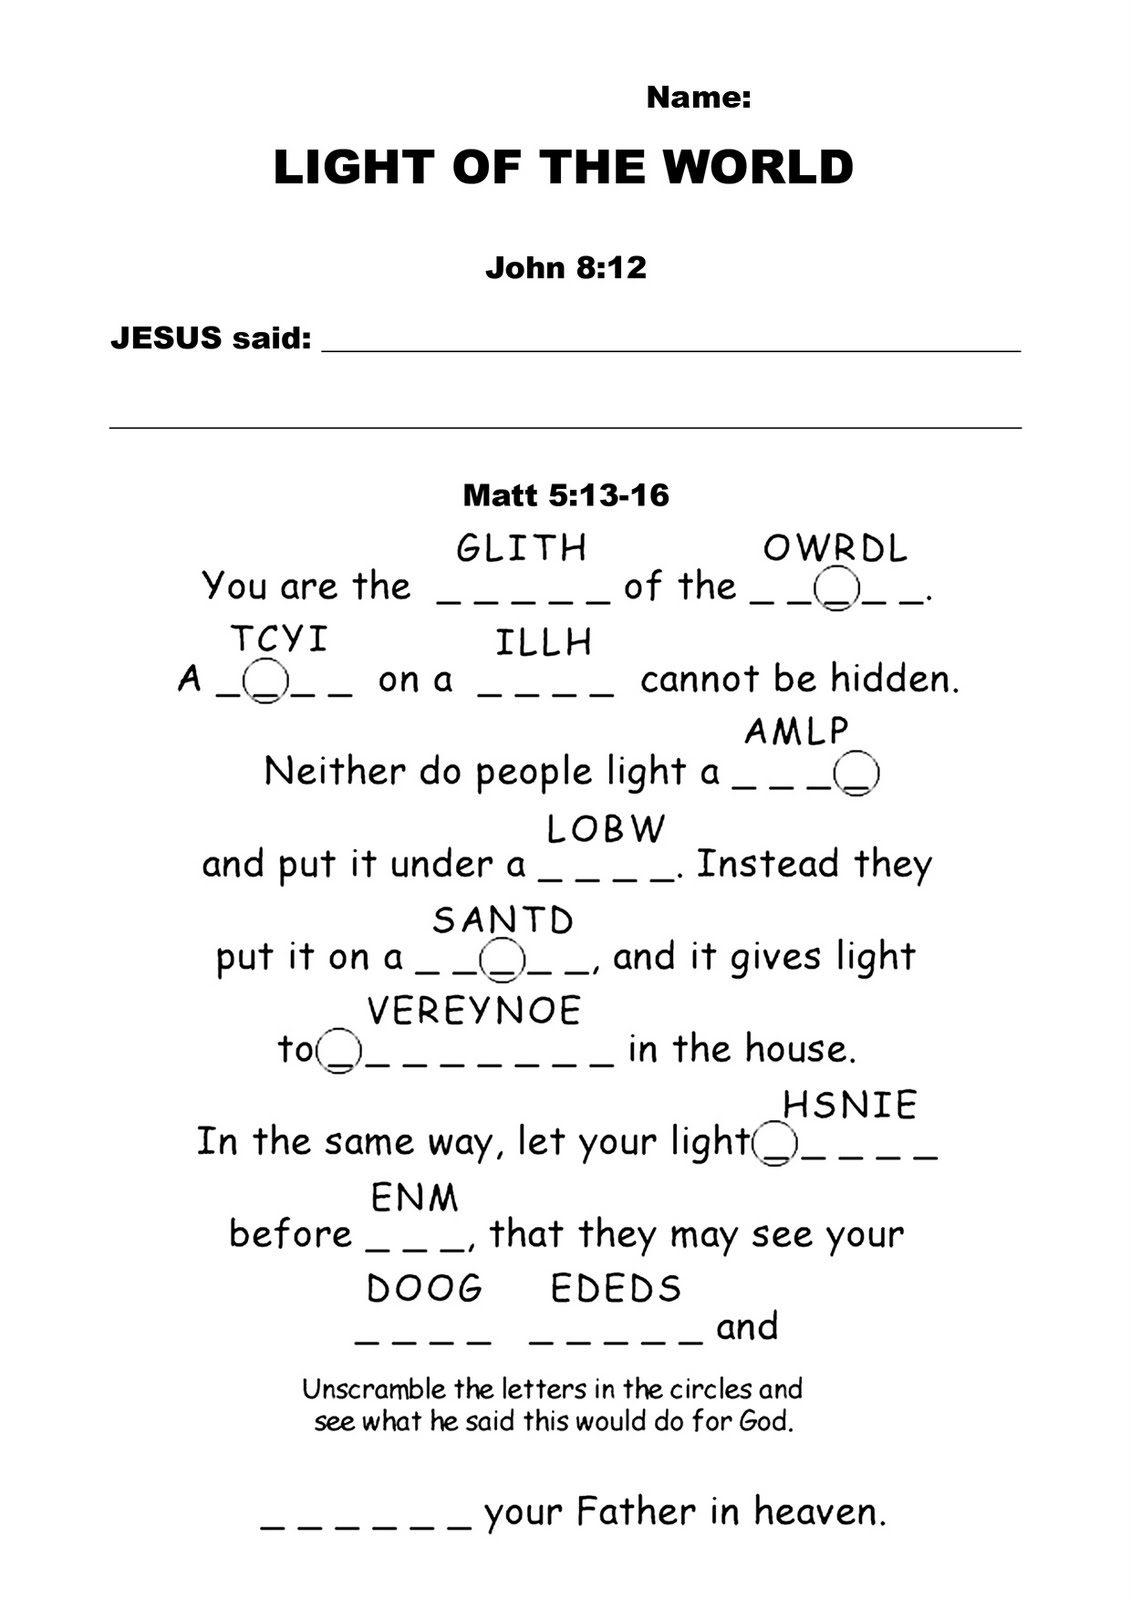 13-best-images-of-light-of-the-world-worksheets-printable-bible